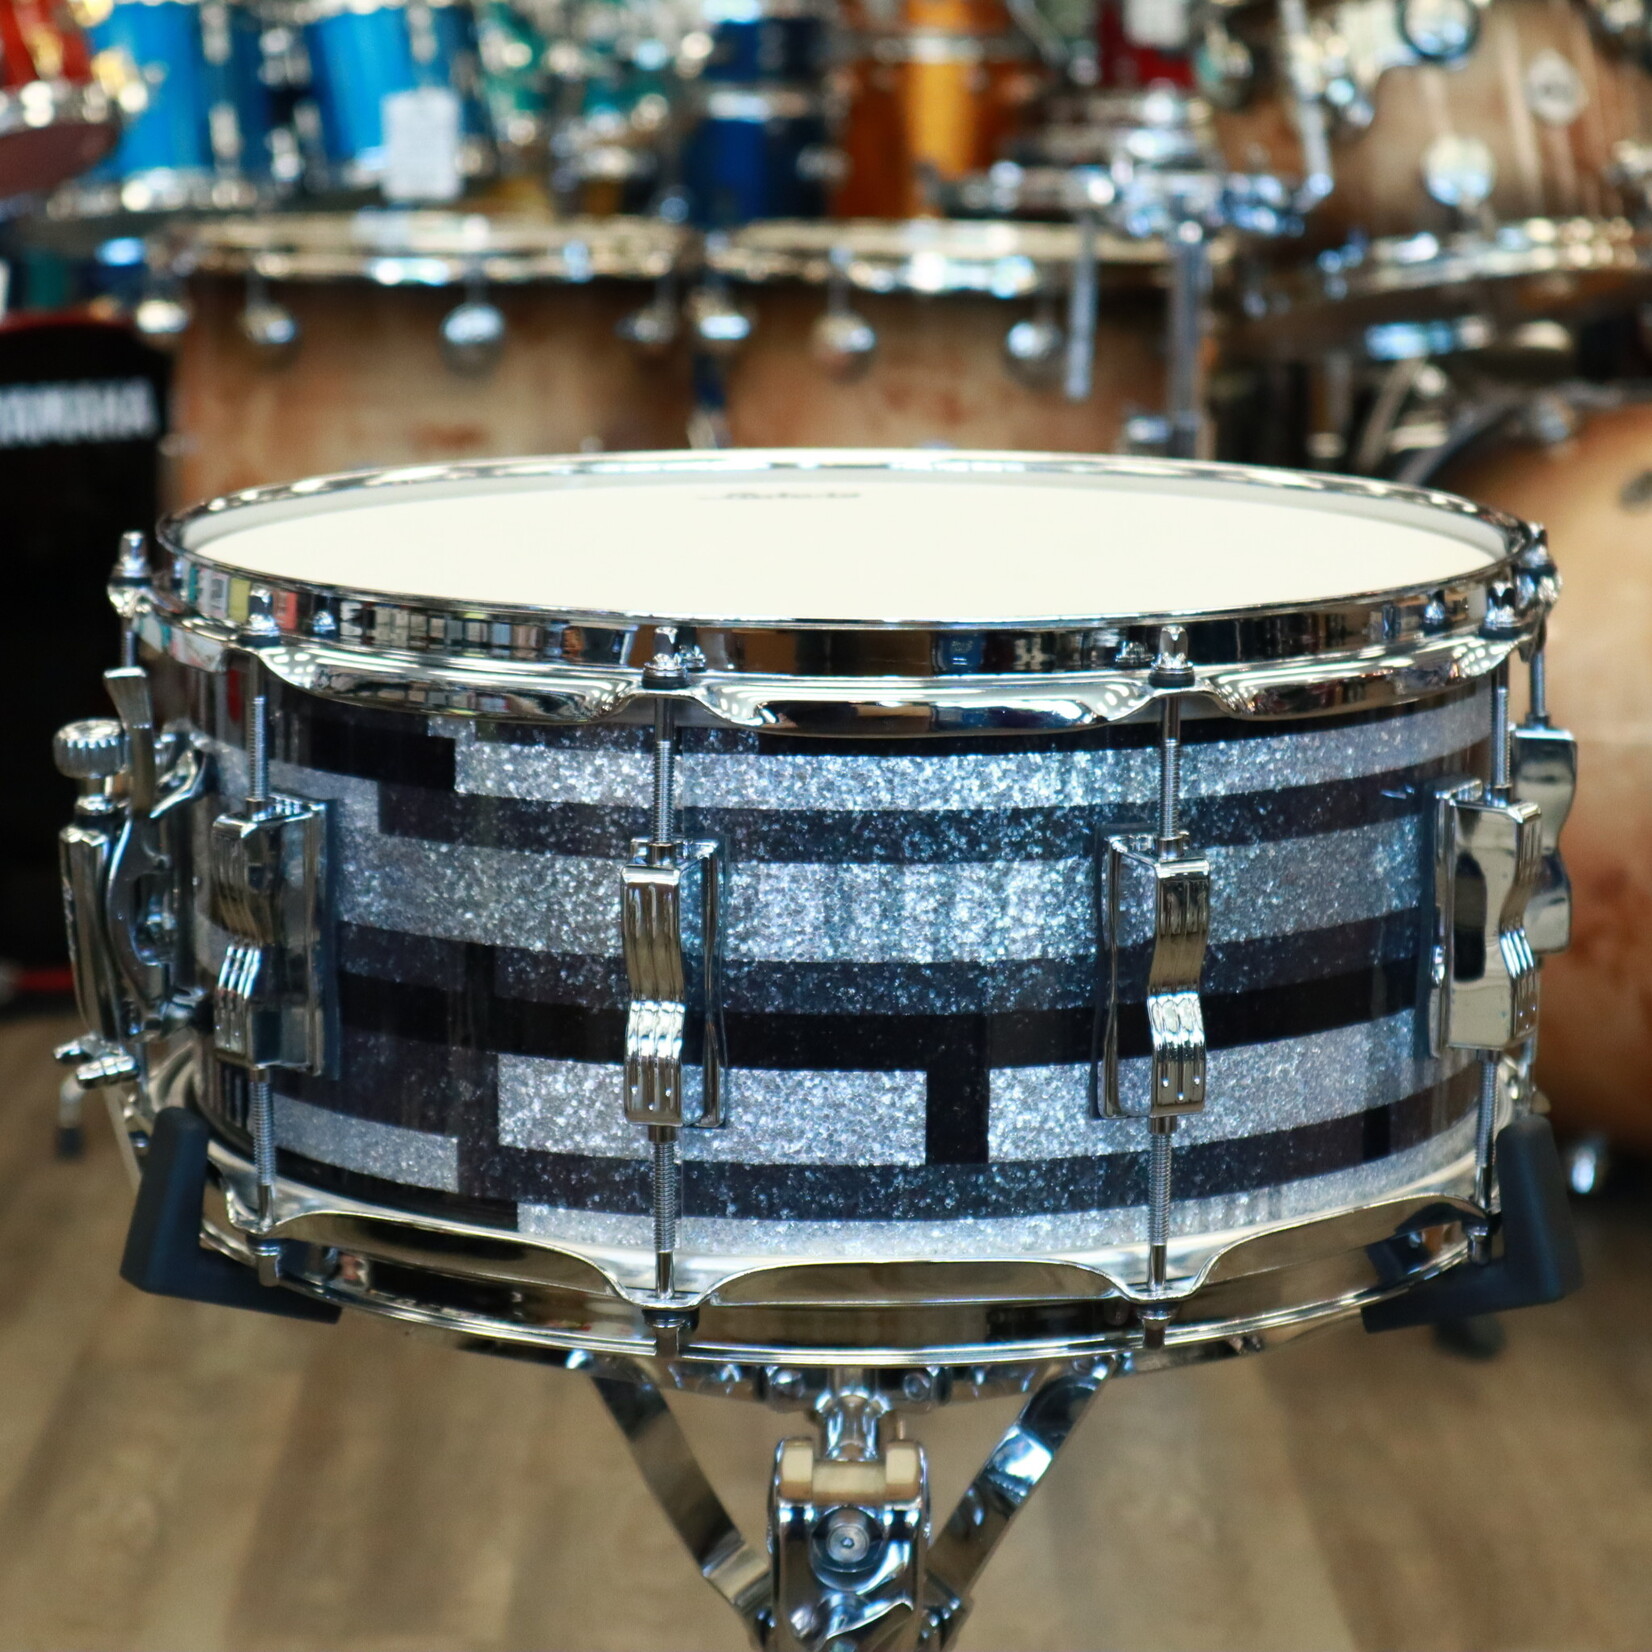 Ludwig Ludwig Classic Maple 6.5x14" Snare Drum (Digital Black Oyster)